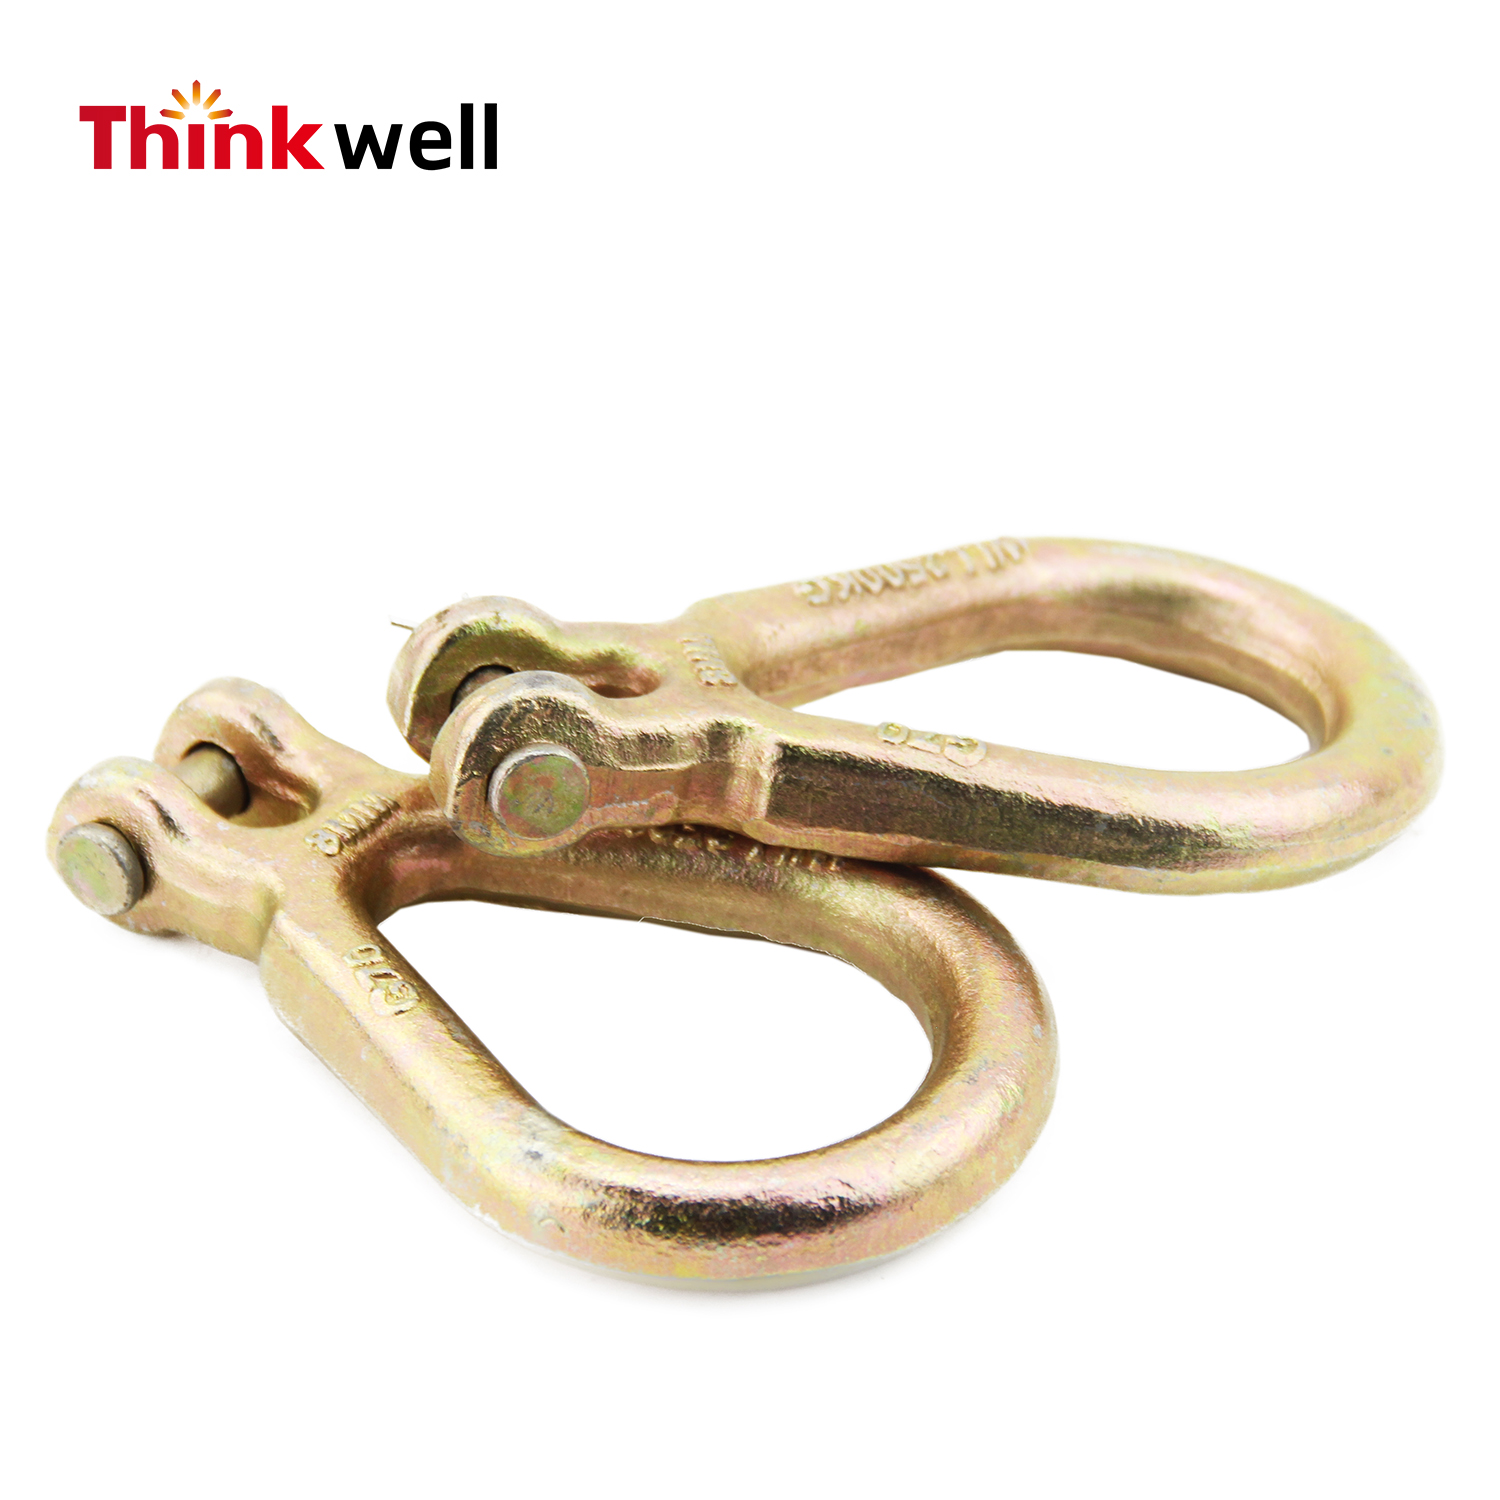 Forged Alloy Clevis Pear Shaped Link